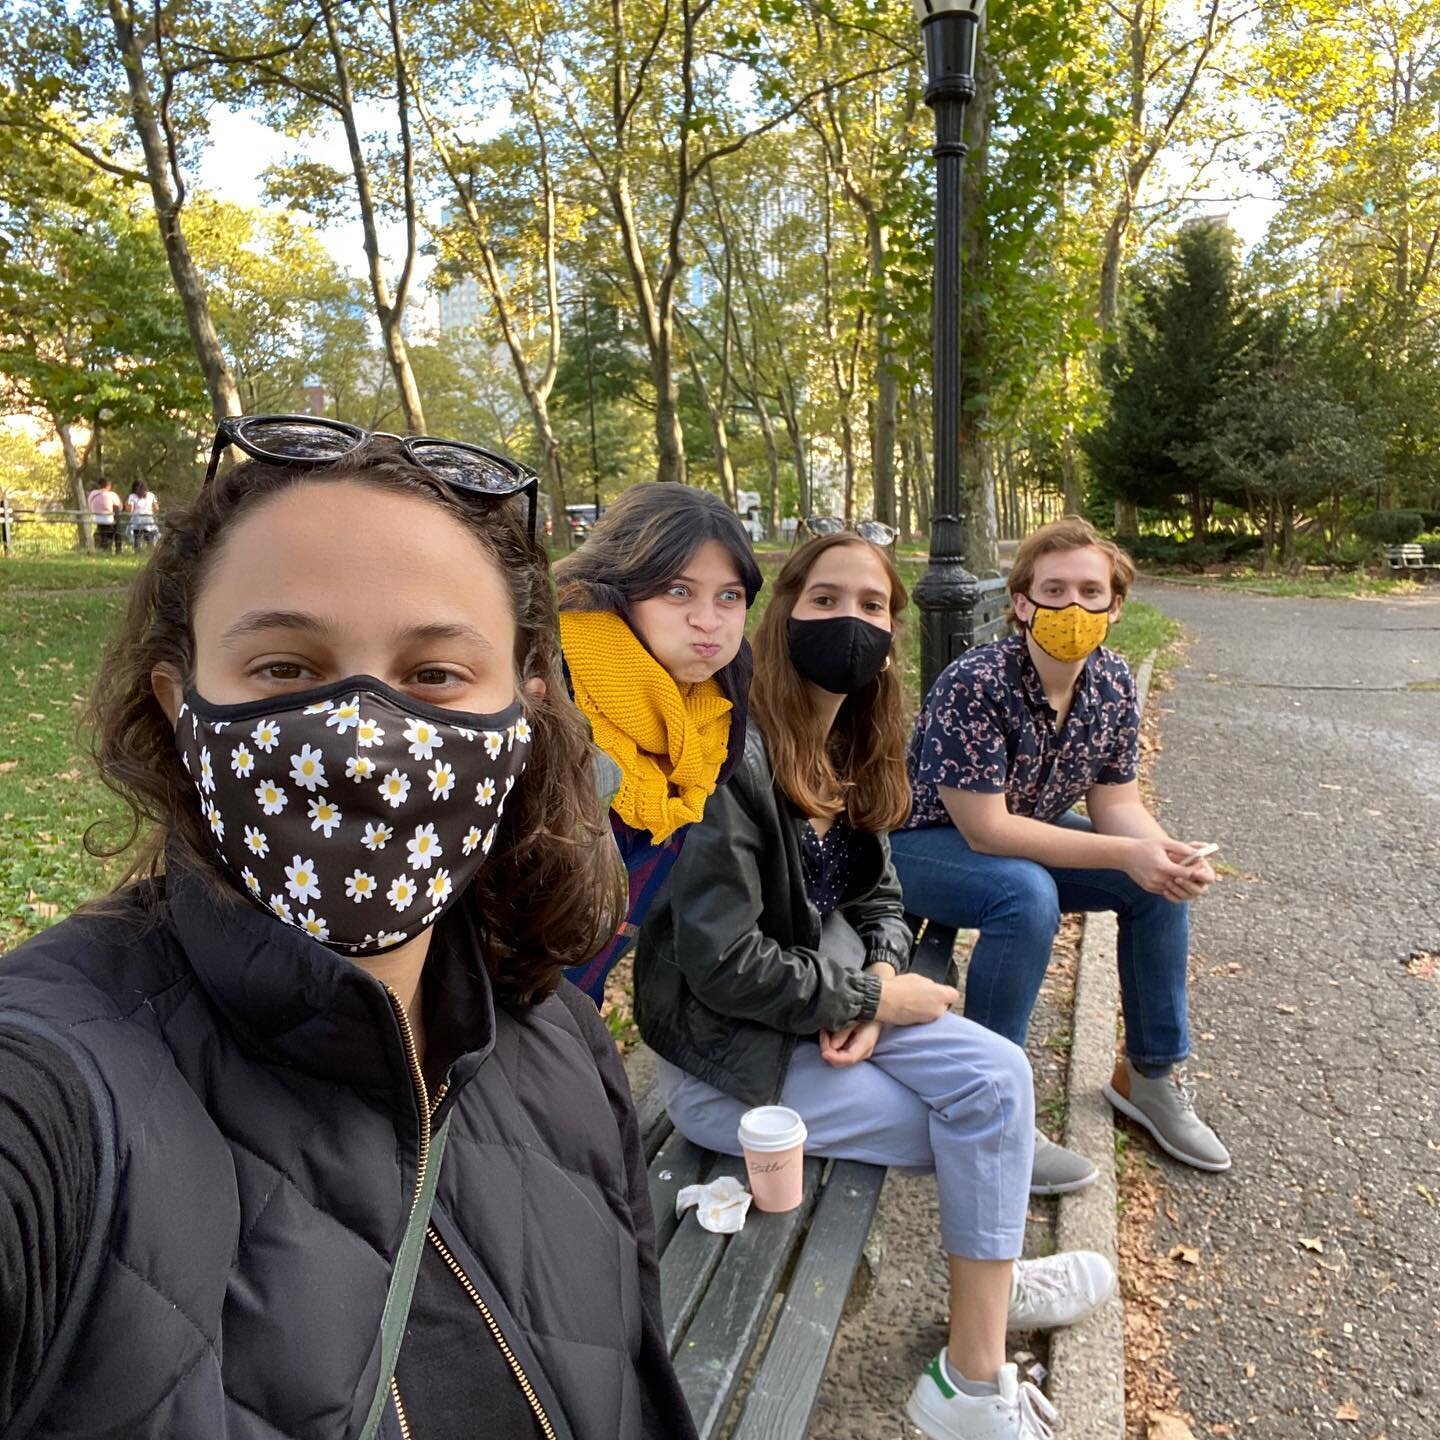 Me and the gang hanging out at a park. After months of waiting nothing stops the 4 of use getting together 🦦🦧🥴😝 #photoshopmyfriend